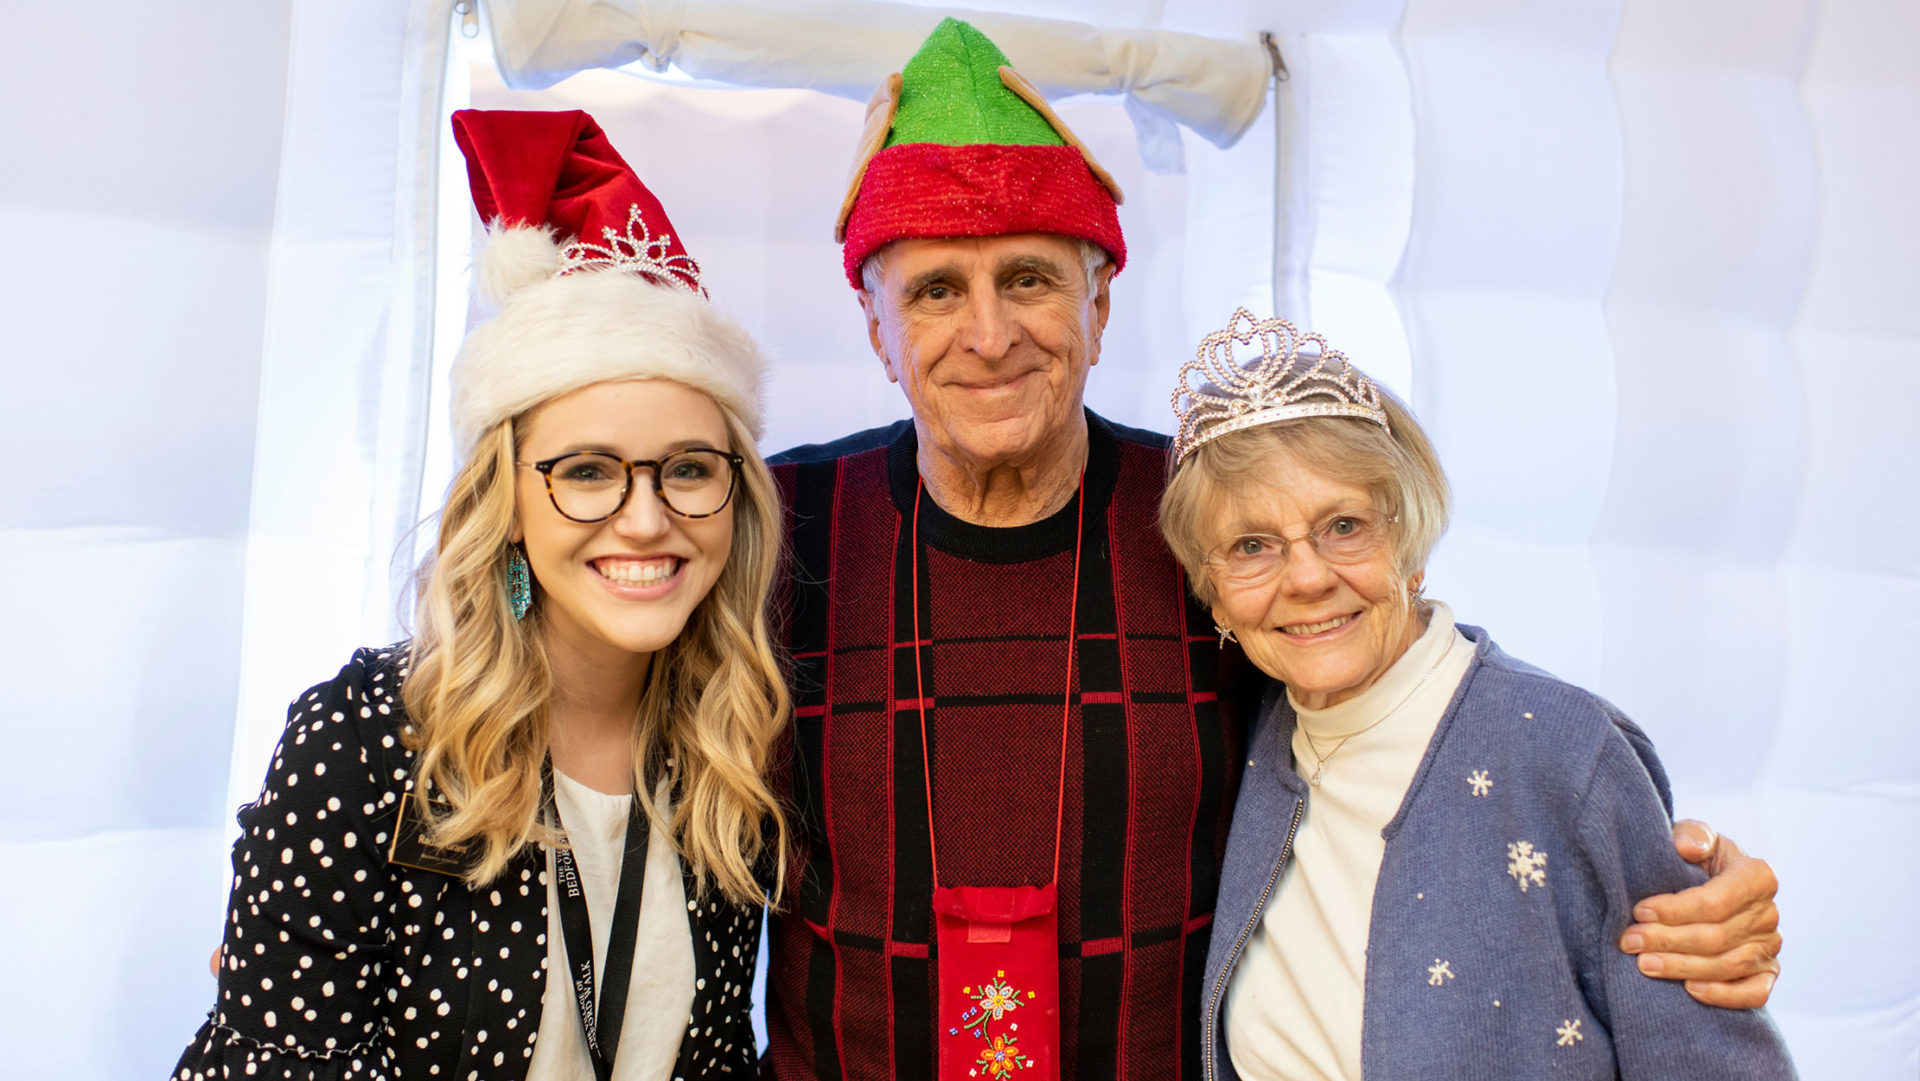 Rachel Grant, The Village of Bedford Walk Concierge & Marketing Associate, poses with residents at the community’s 2018 holiday party.